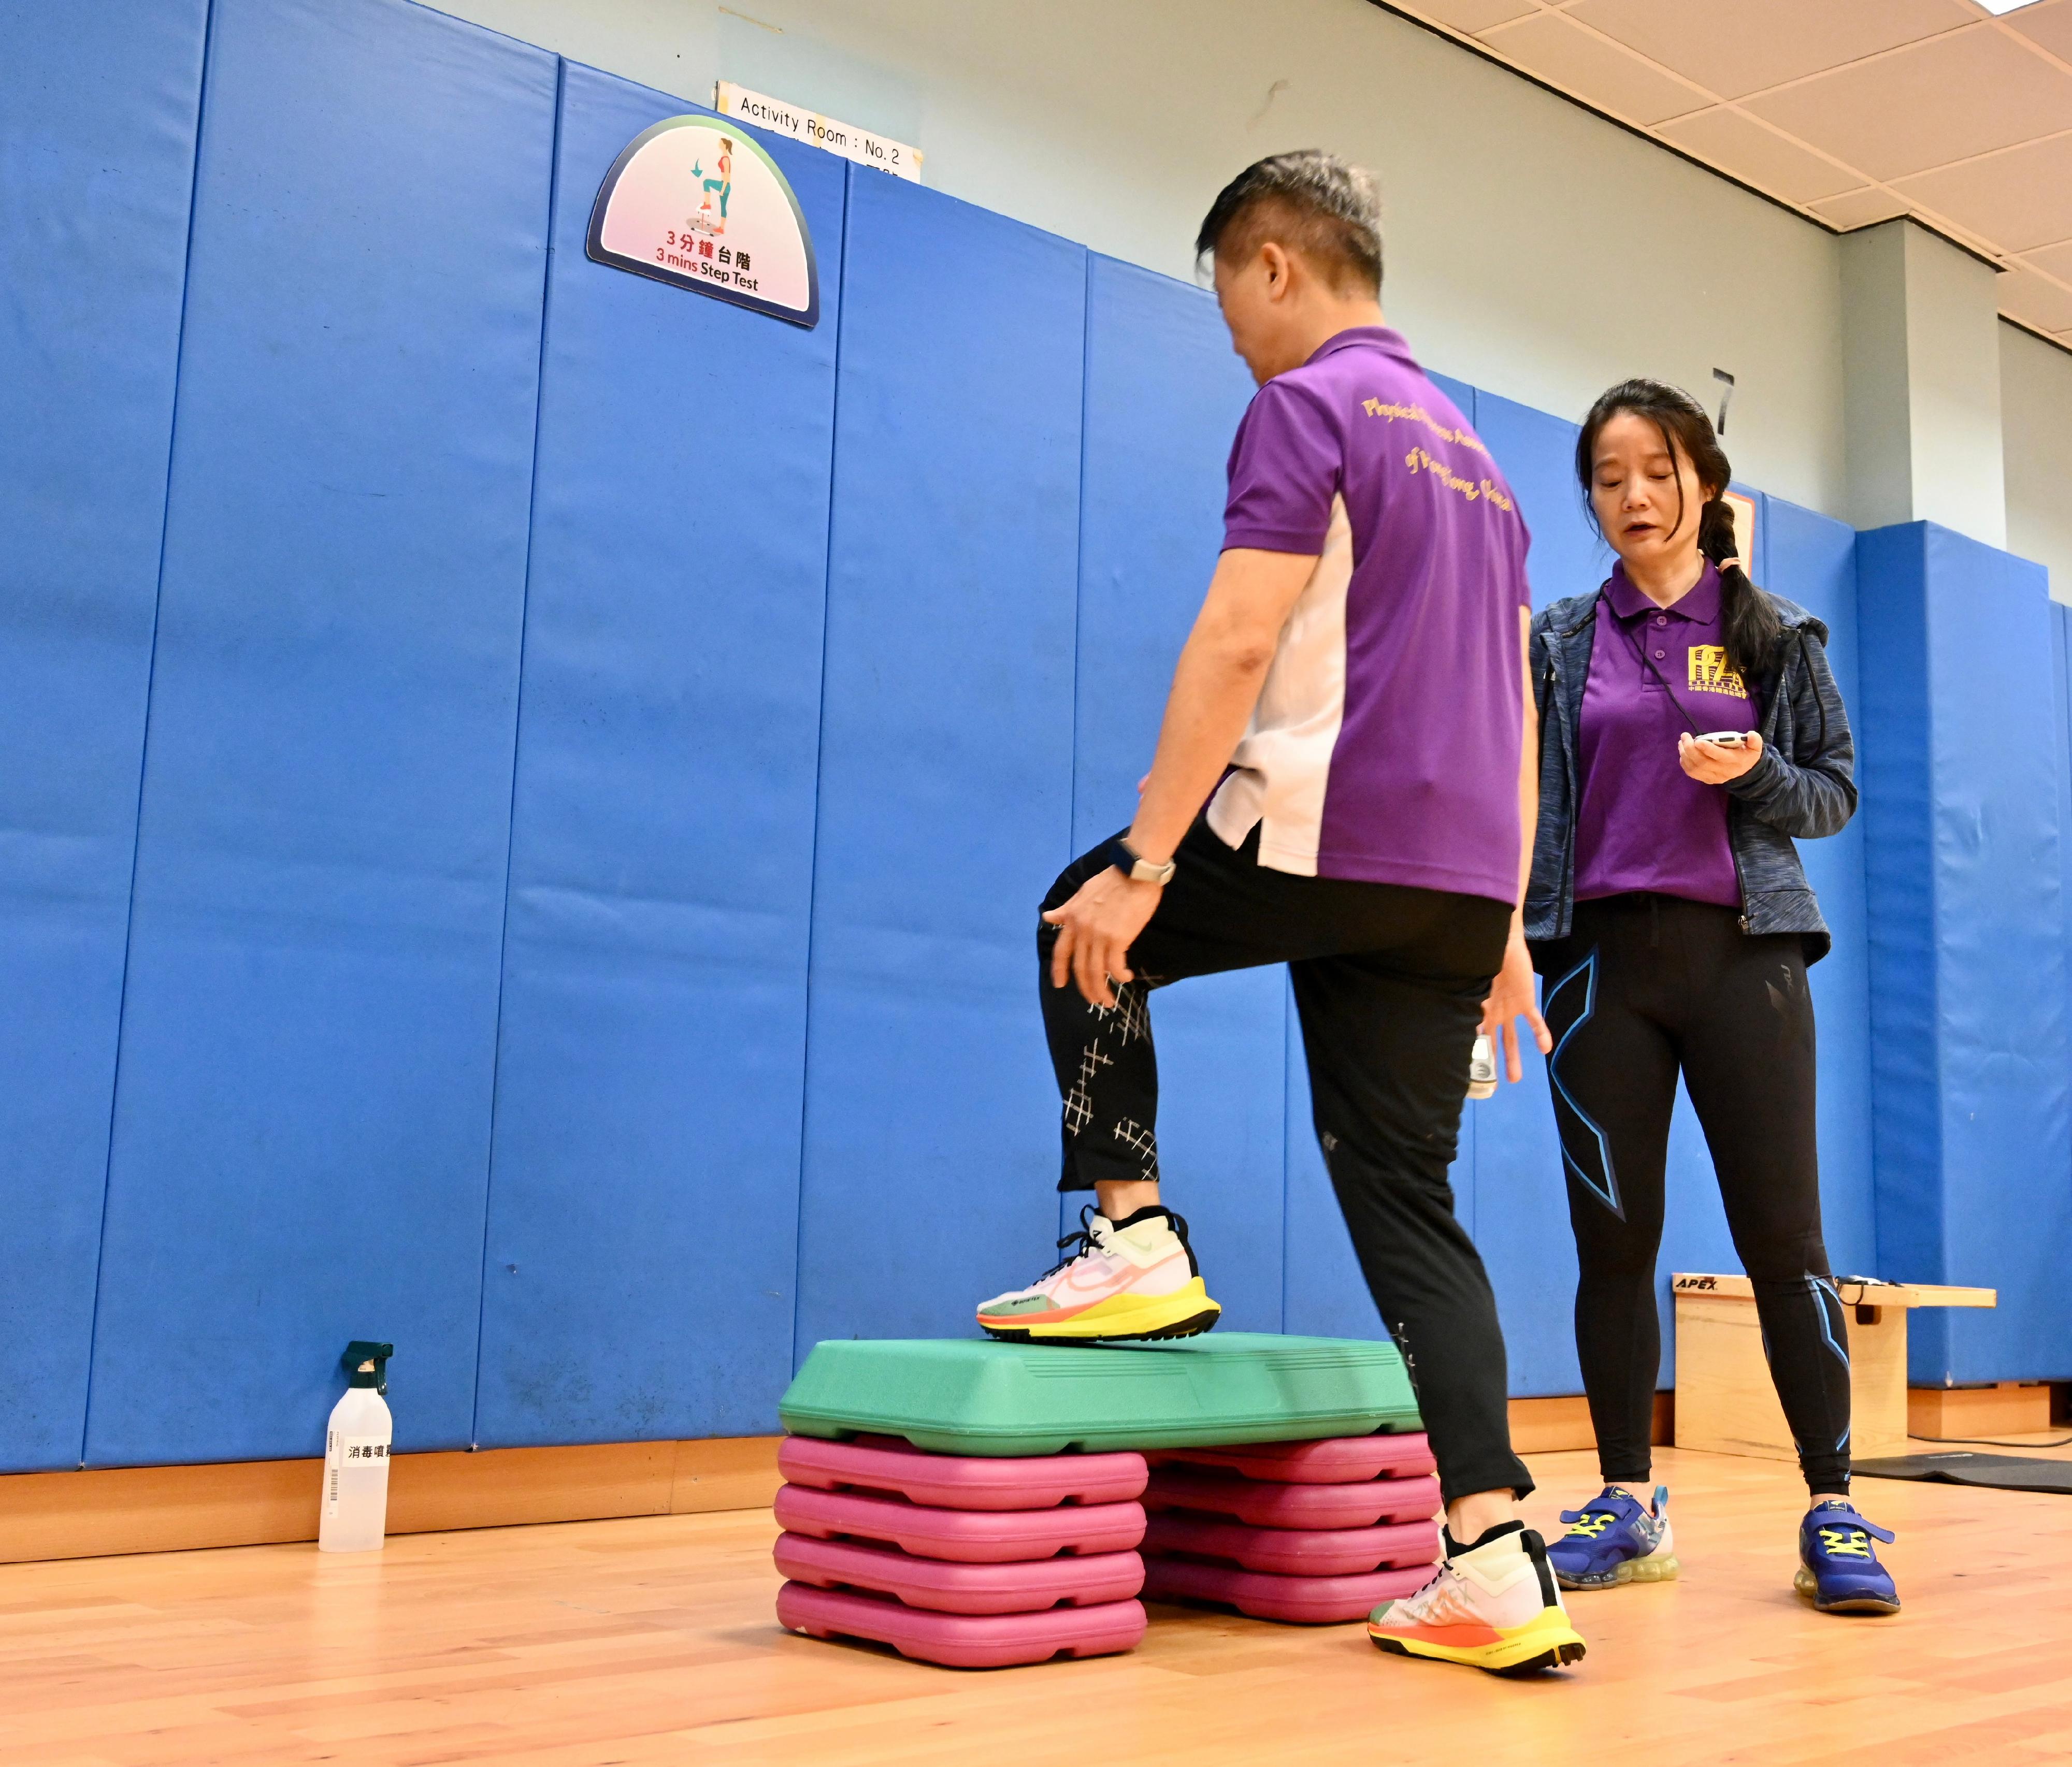 The Community Sports Committee announced the survey findings of the Territory-wide Physical Fitness Survey for the Community today (June 16). Photo shows a physical fitness instructor demonstrating a physical fitness test conducted in the survey.